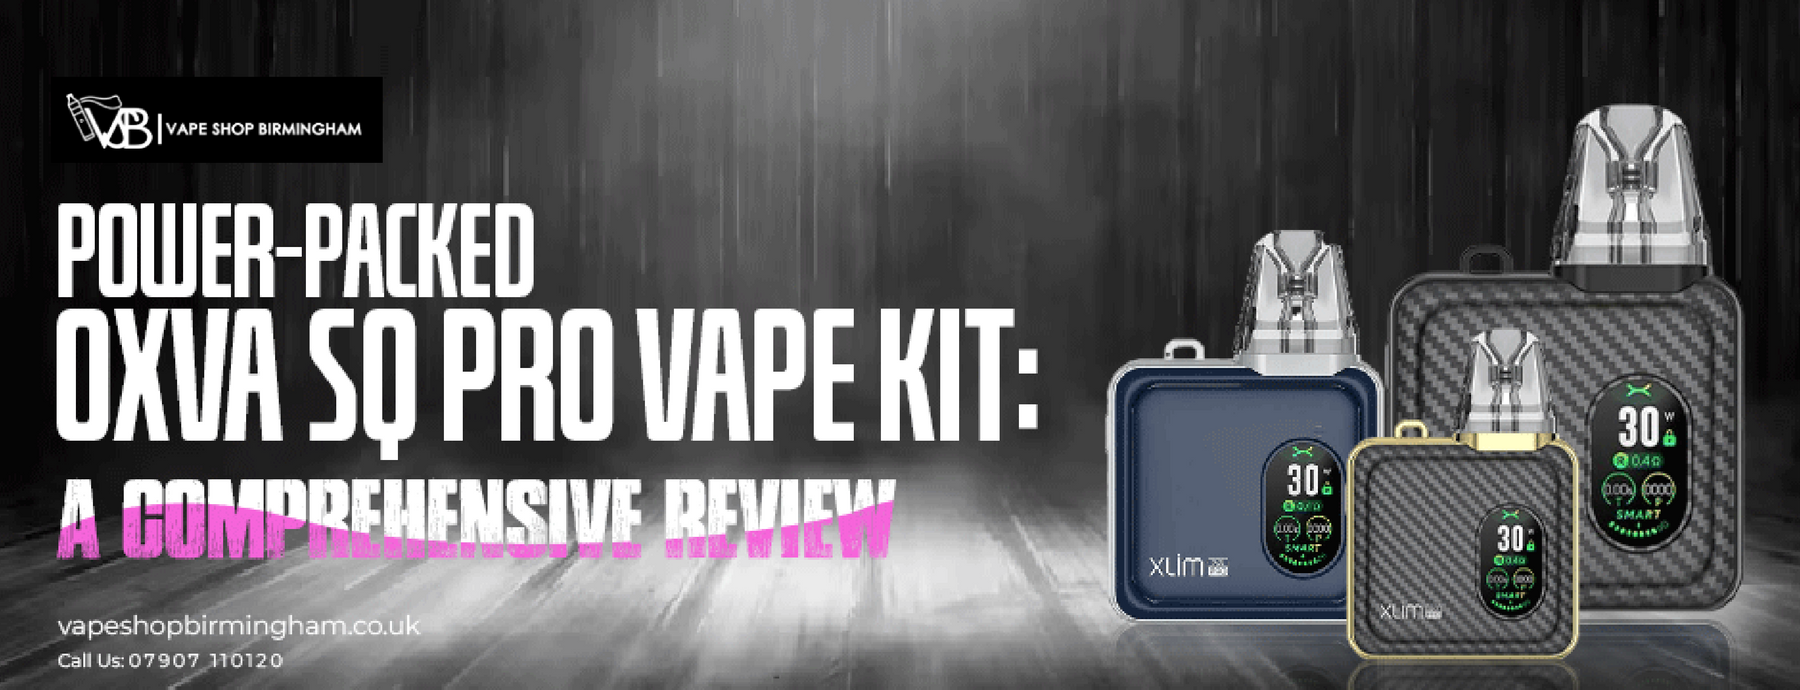 Power-Packed Oxva SQ Pro Vape Kit: A Comprehensive Review